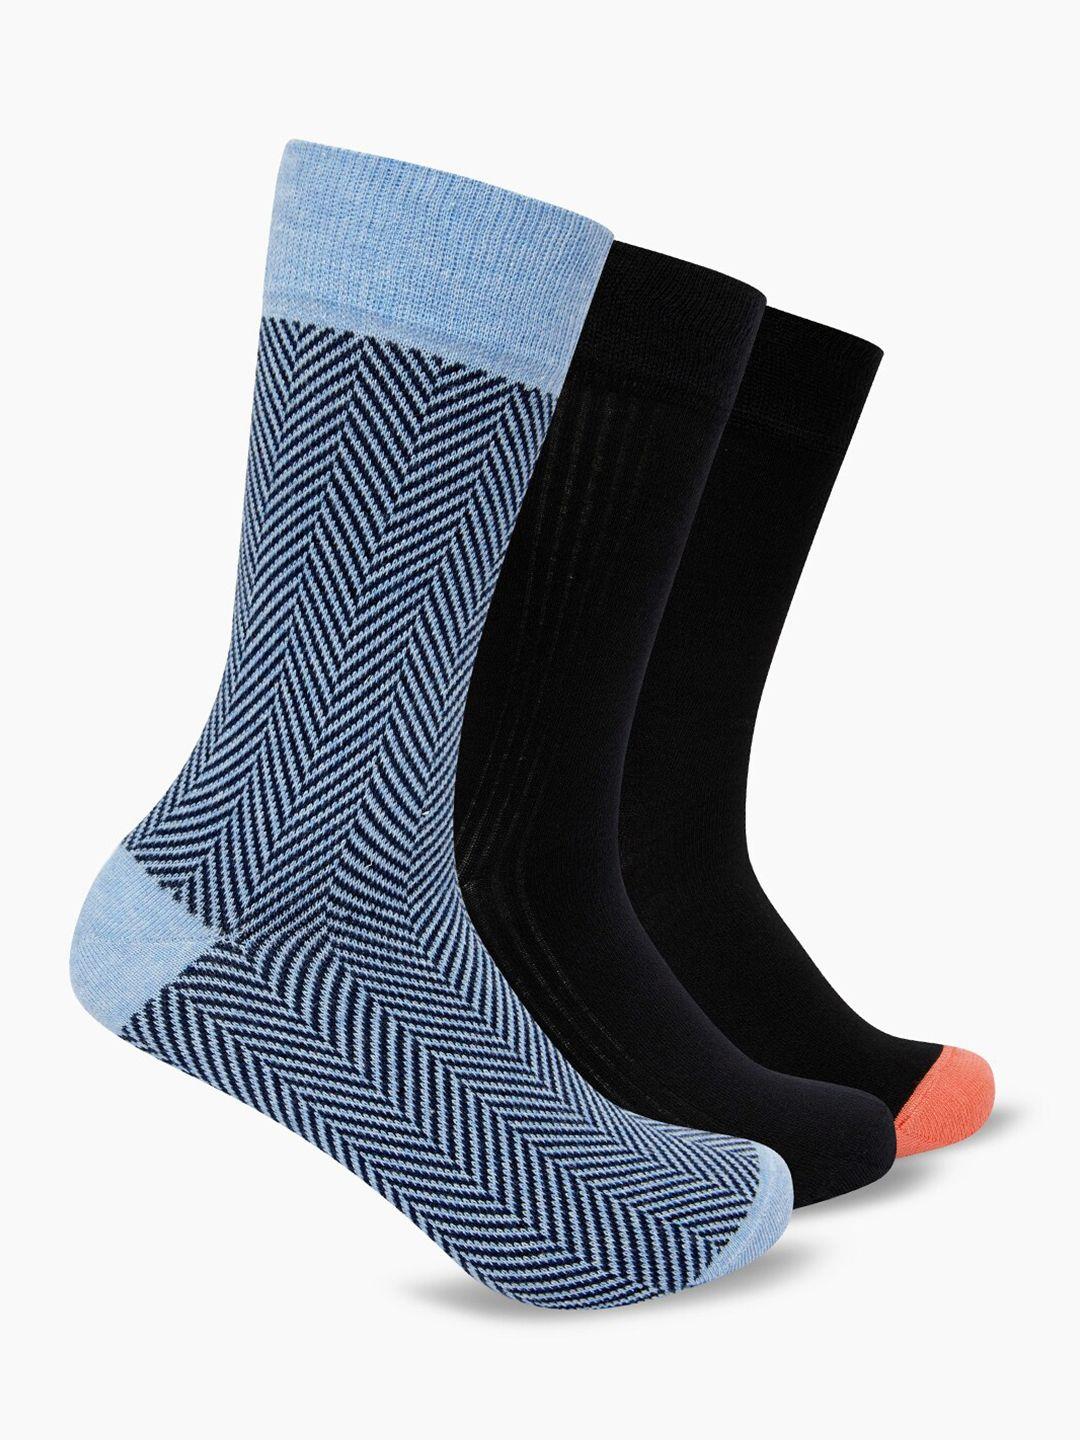 smarty pants unisex pack of 5 blue & black solid cotton calf-length socks